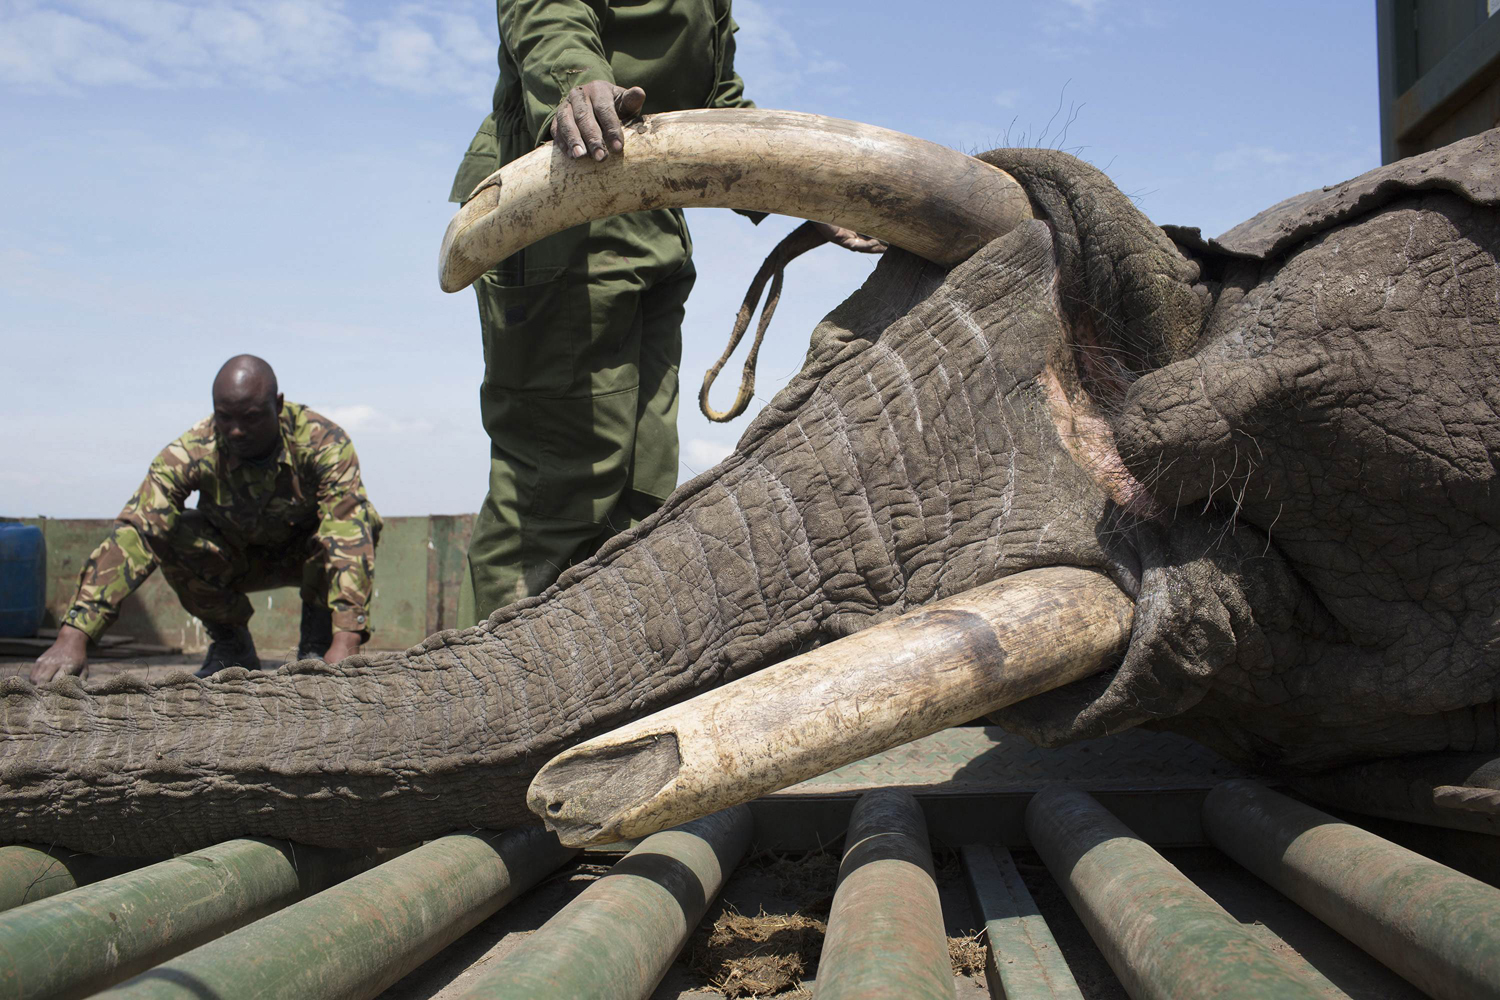 A sedated elephant is placed in a container on a truck by KWS wardens during a relocation exercise on the margins of the Ol Pejeta Conservancy in central Kenya